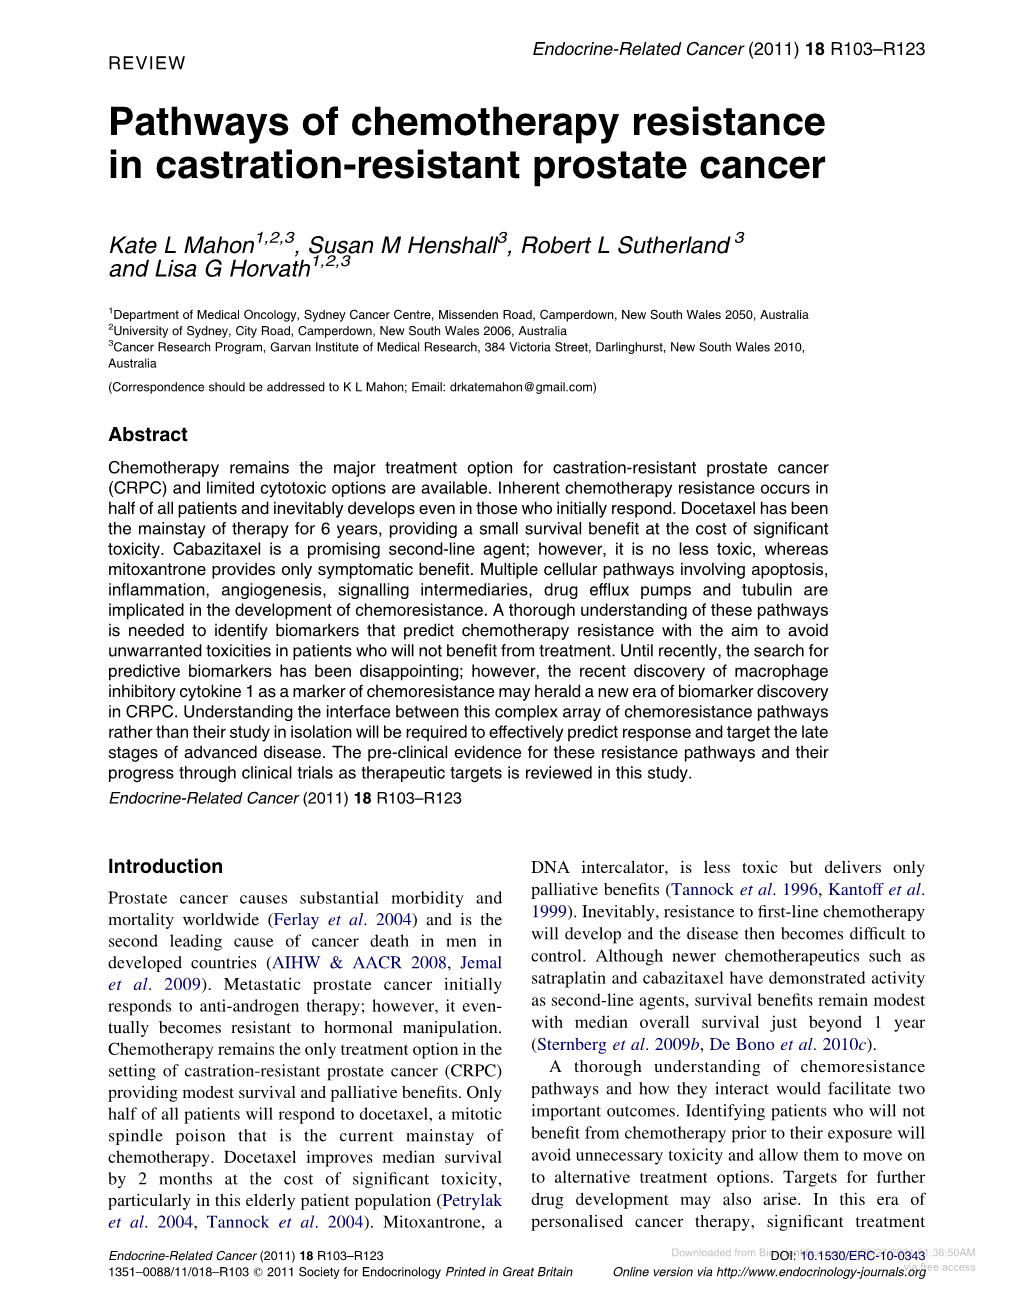 Pathways of Chemotherapy Resistance in Castration-Resistant Prostate Cancer